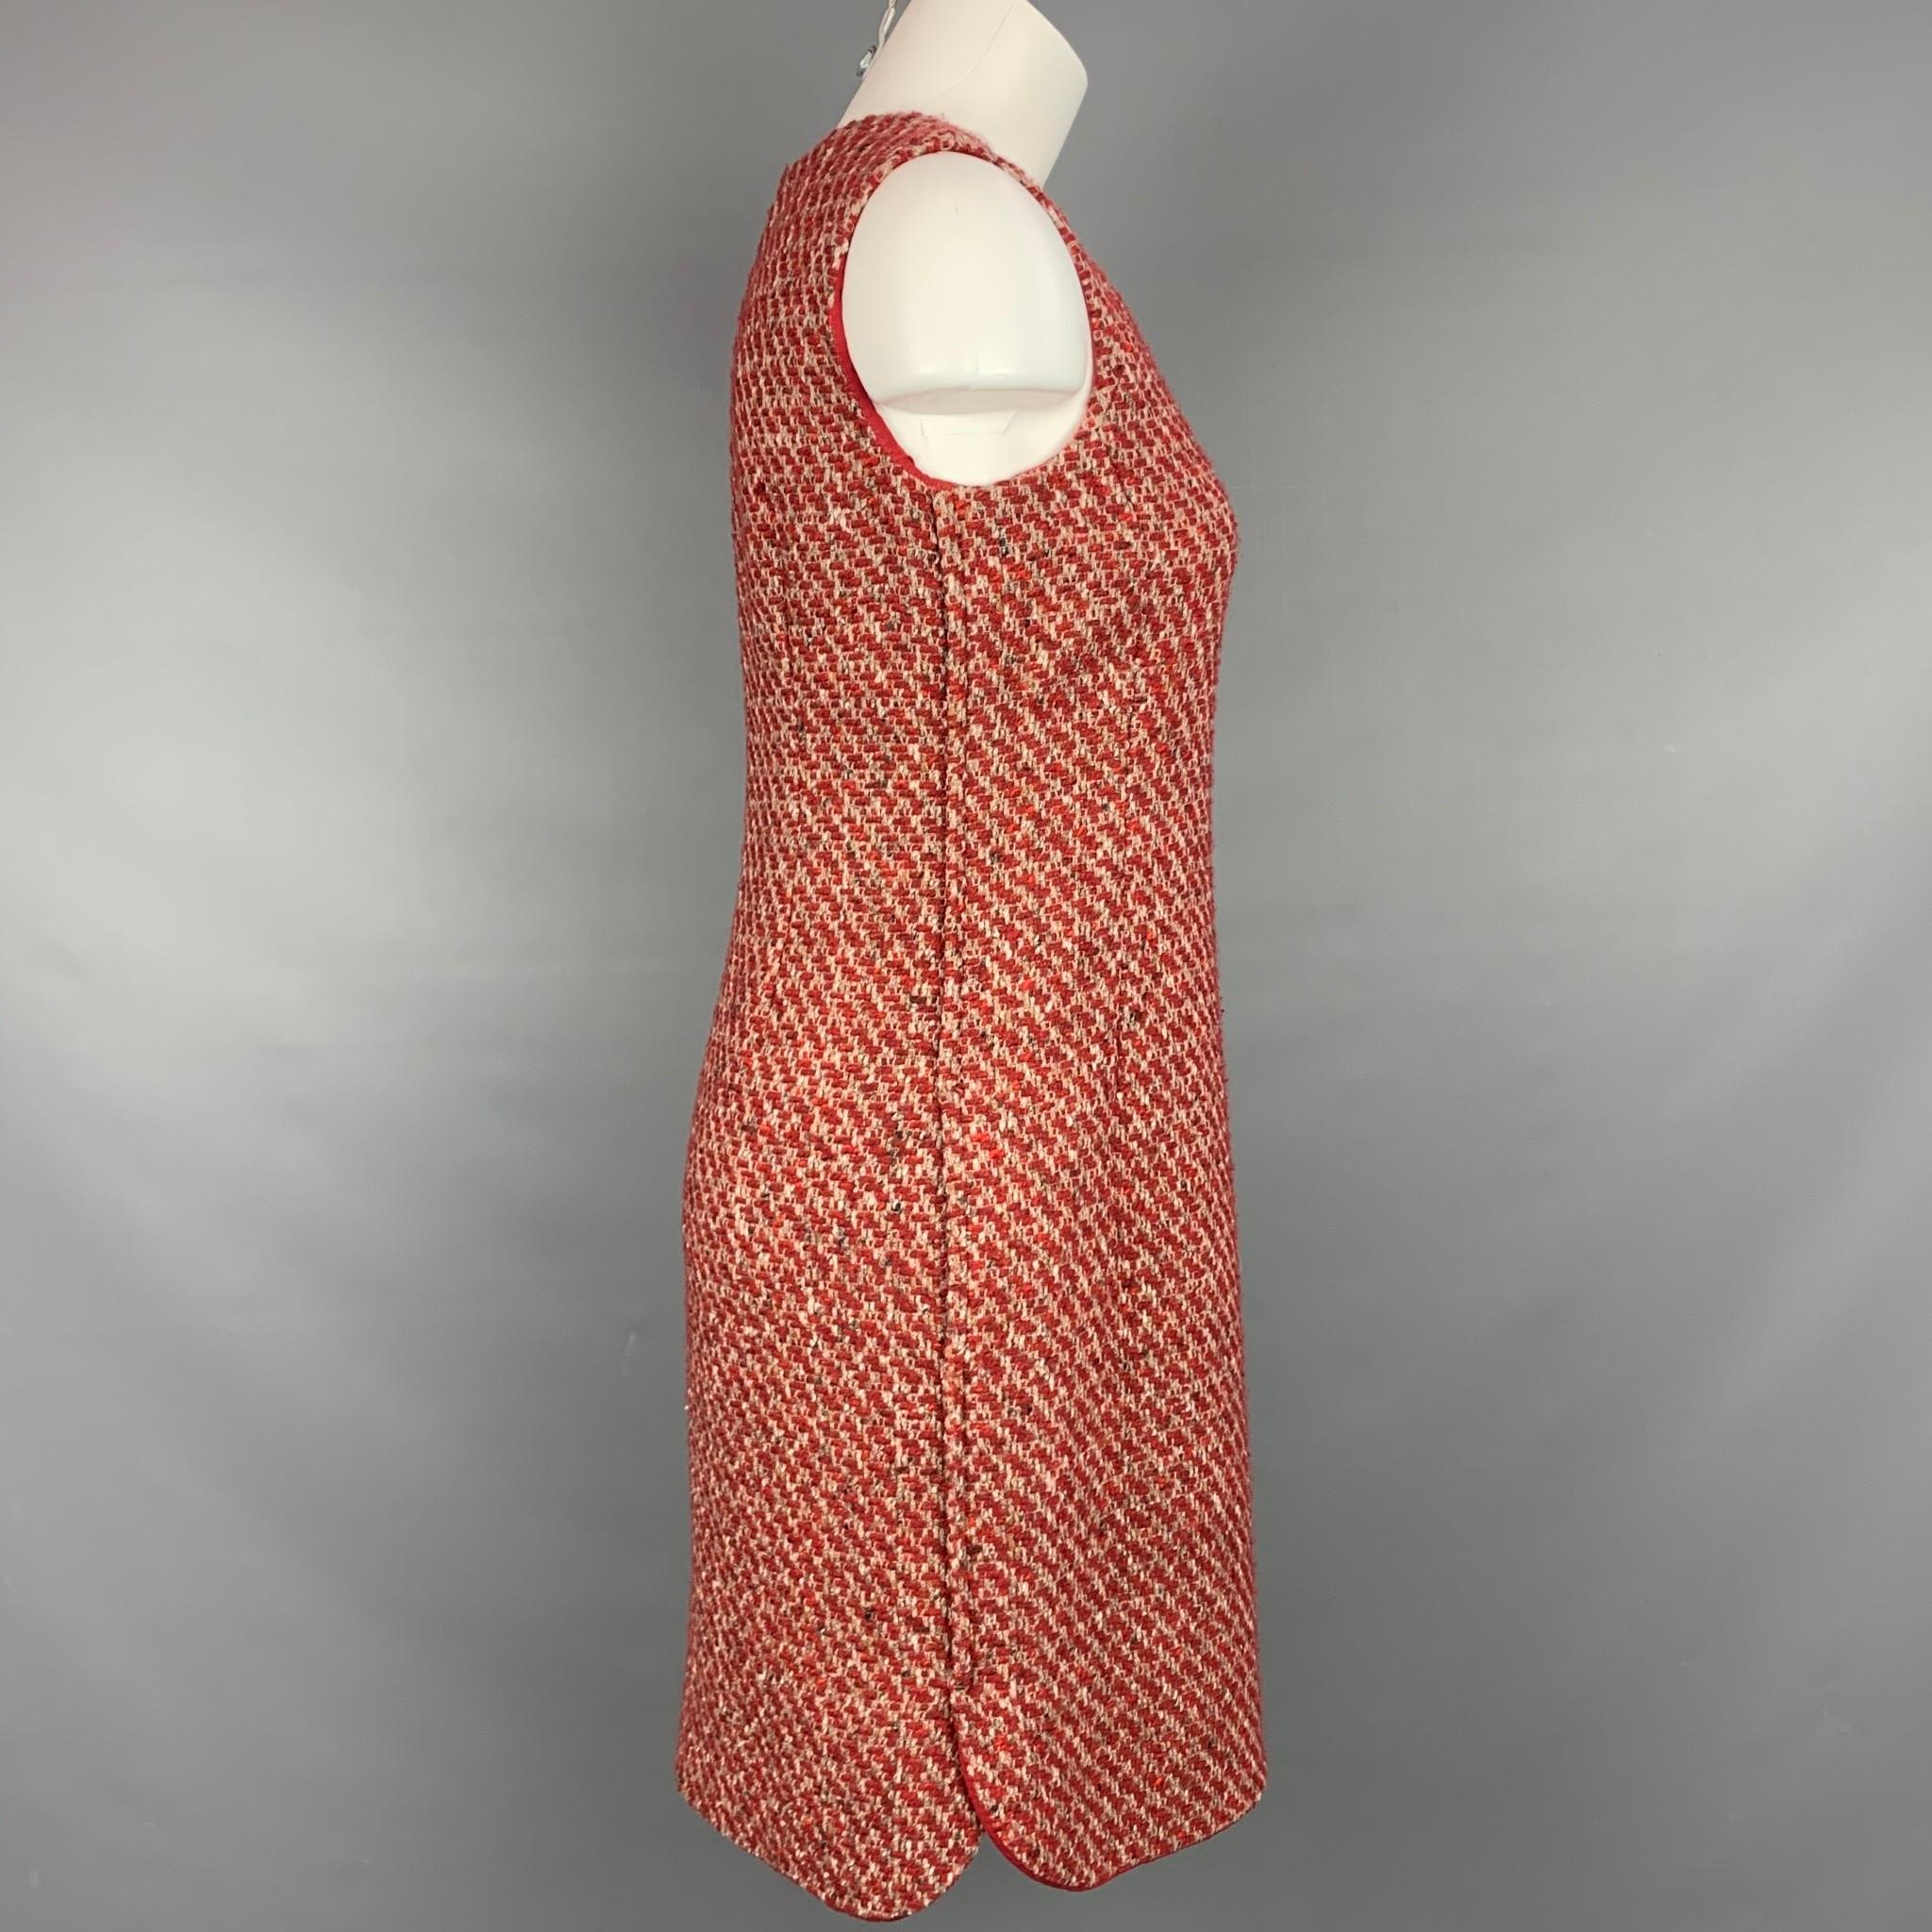 LORO PIANA dress comes in a red & taupe boucle textured cashmere blend with a full liner featuring a shift style, slit pockets, and a back zipper closure. Made in Italy.

Very Good Pre-Owned Condition.
Marked: 42

Measurements:

Bust: 34 in.
Waist: